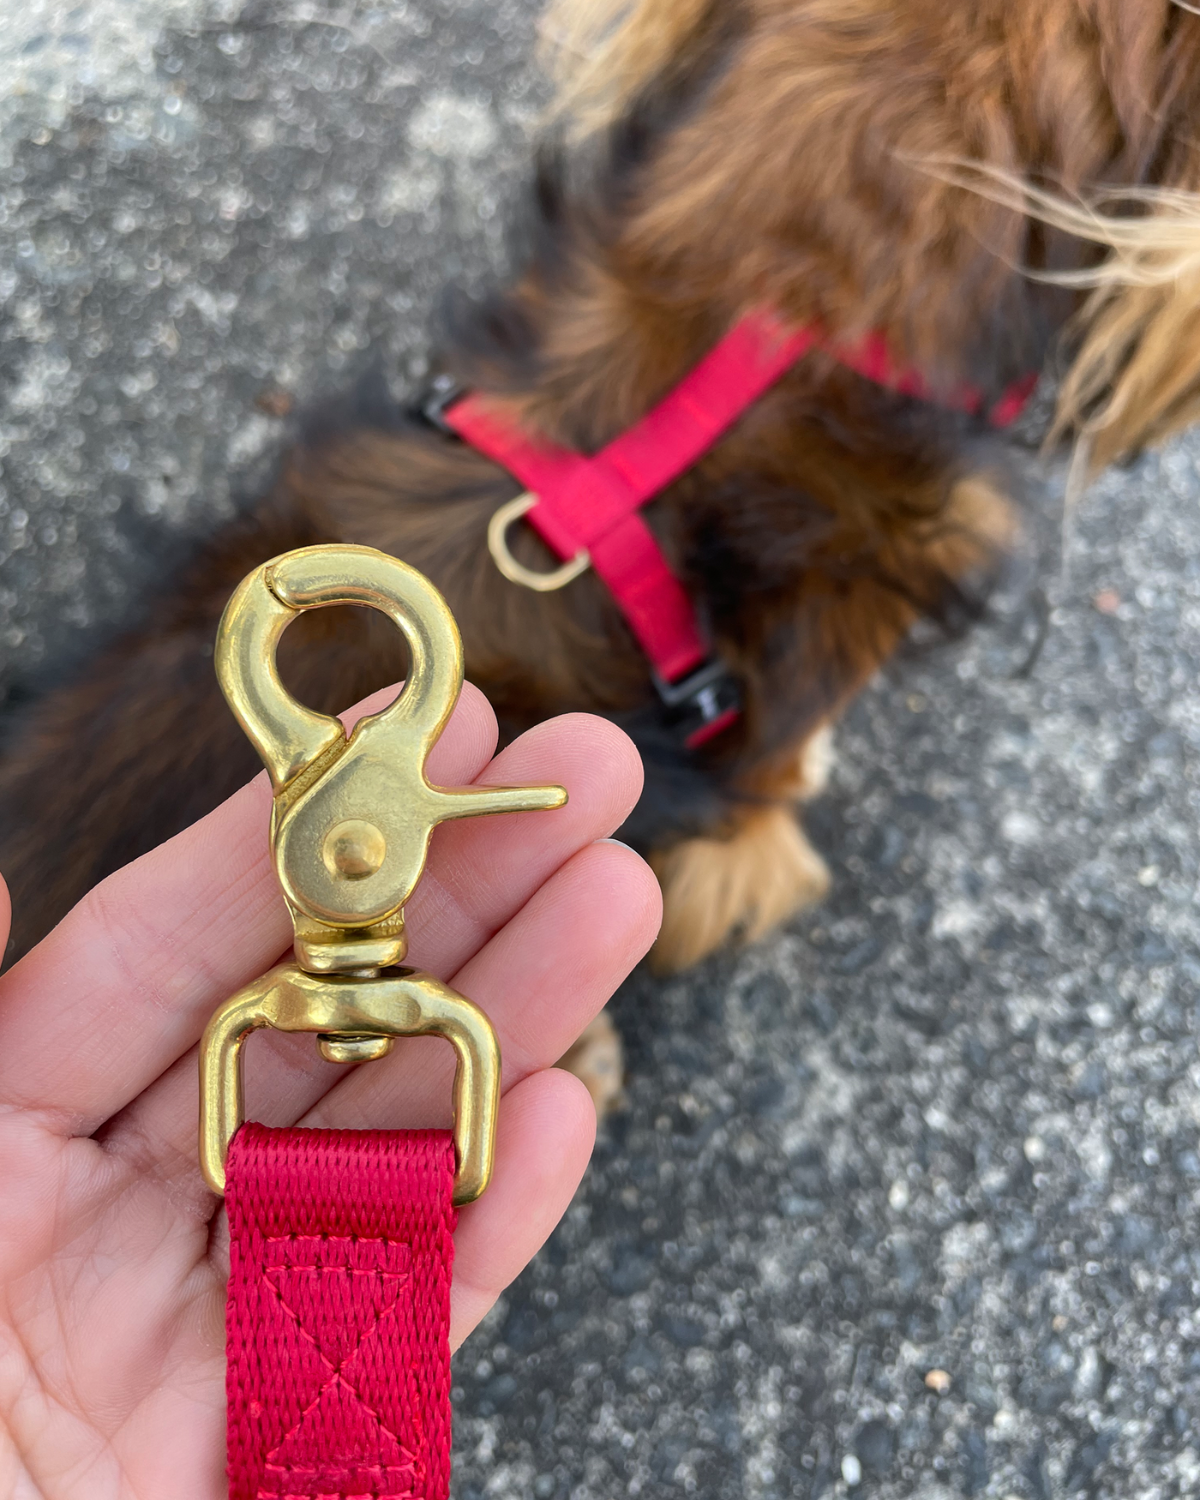 DJANGO's standard 5 ft dog leashes feature solid cast brass hardware and pair perfectly with your favorite DJANGO Adventure Dog Harness and Collar set - djangobrand.com